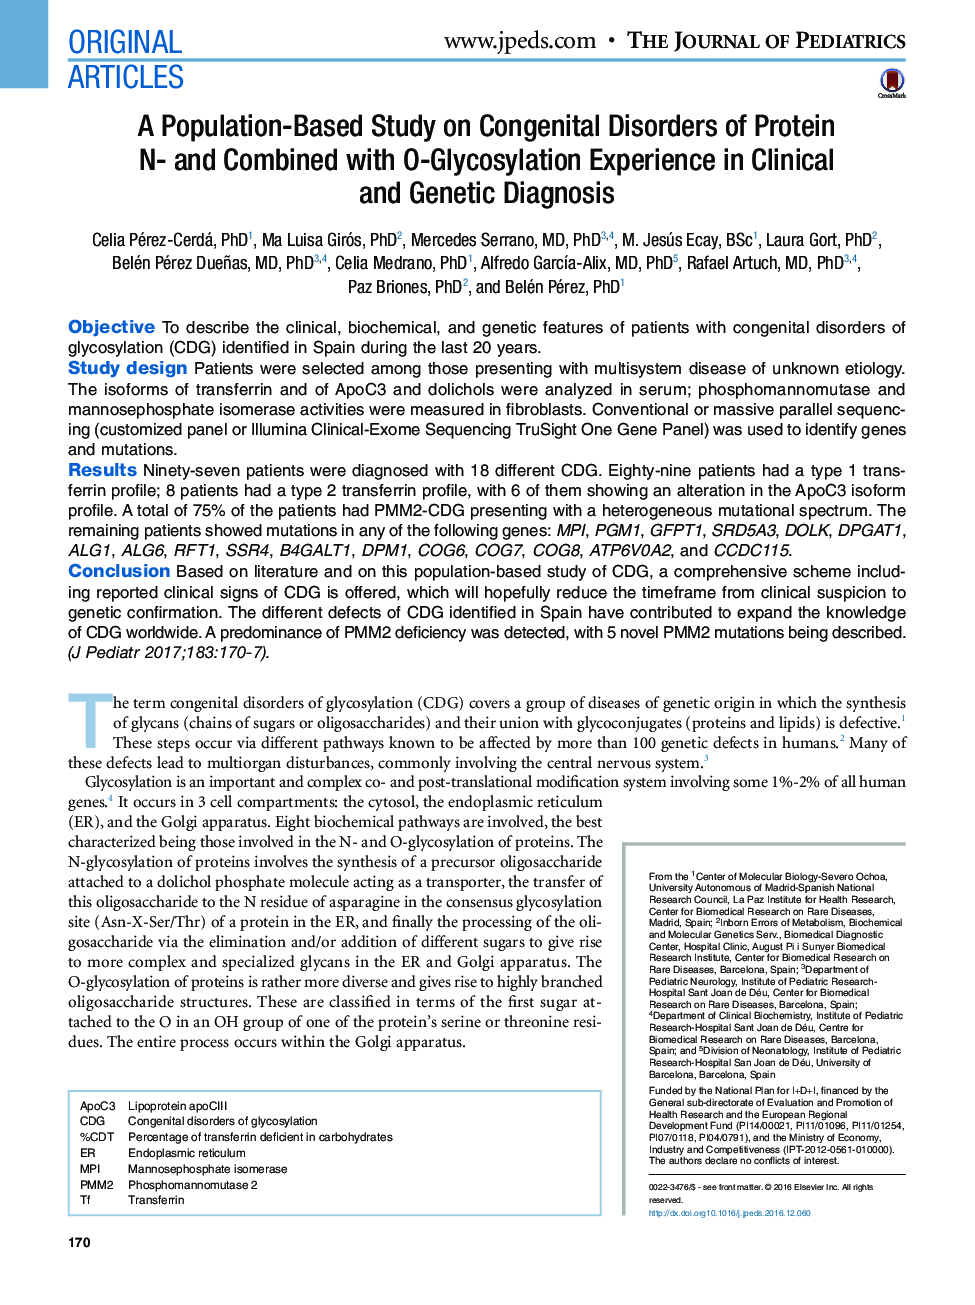 Original ArticlesA Population-Based Study on Congenital Disorders of Protein N- and Combined with O-Glycosylation Experience in Clinical and Genetic Diagnosis